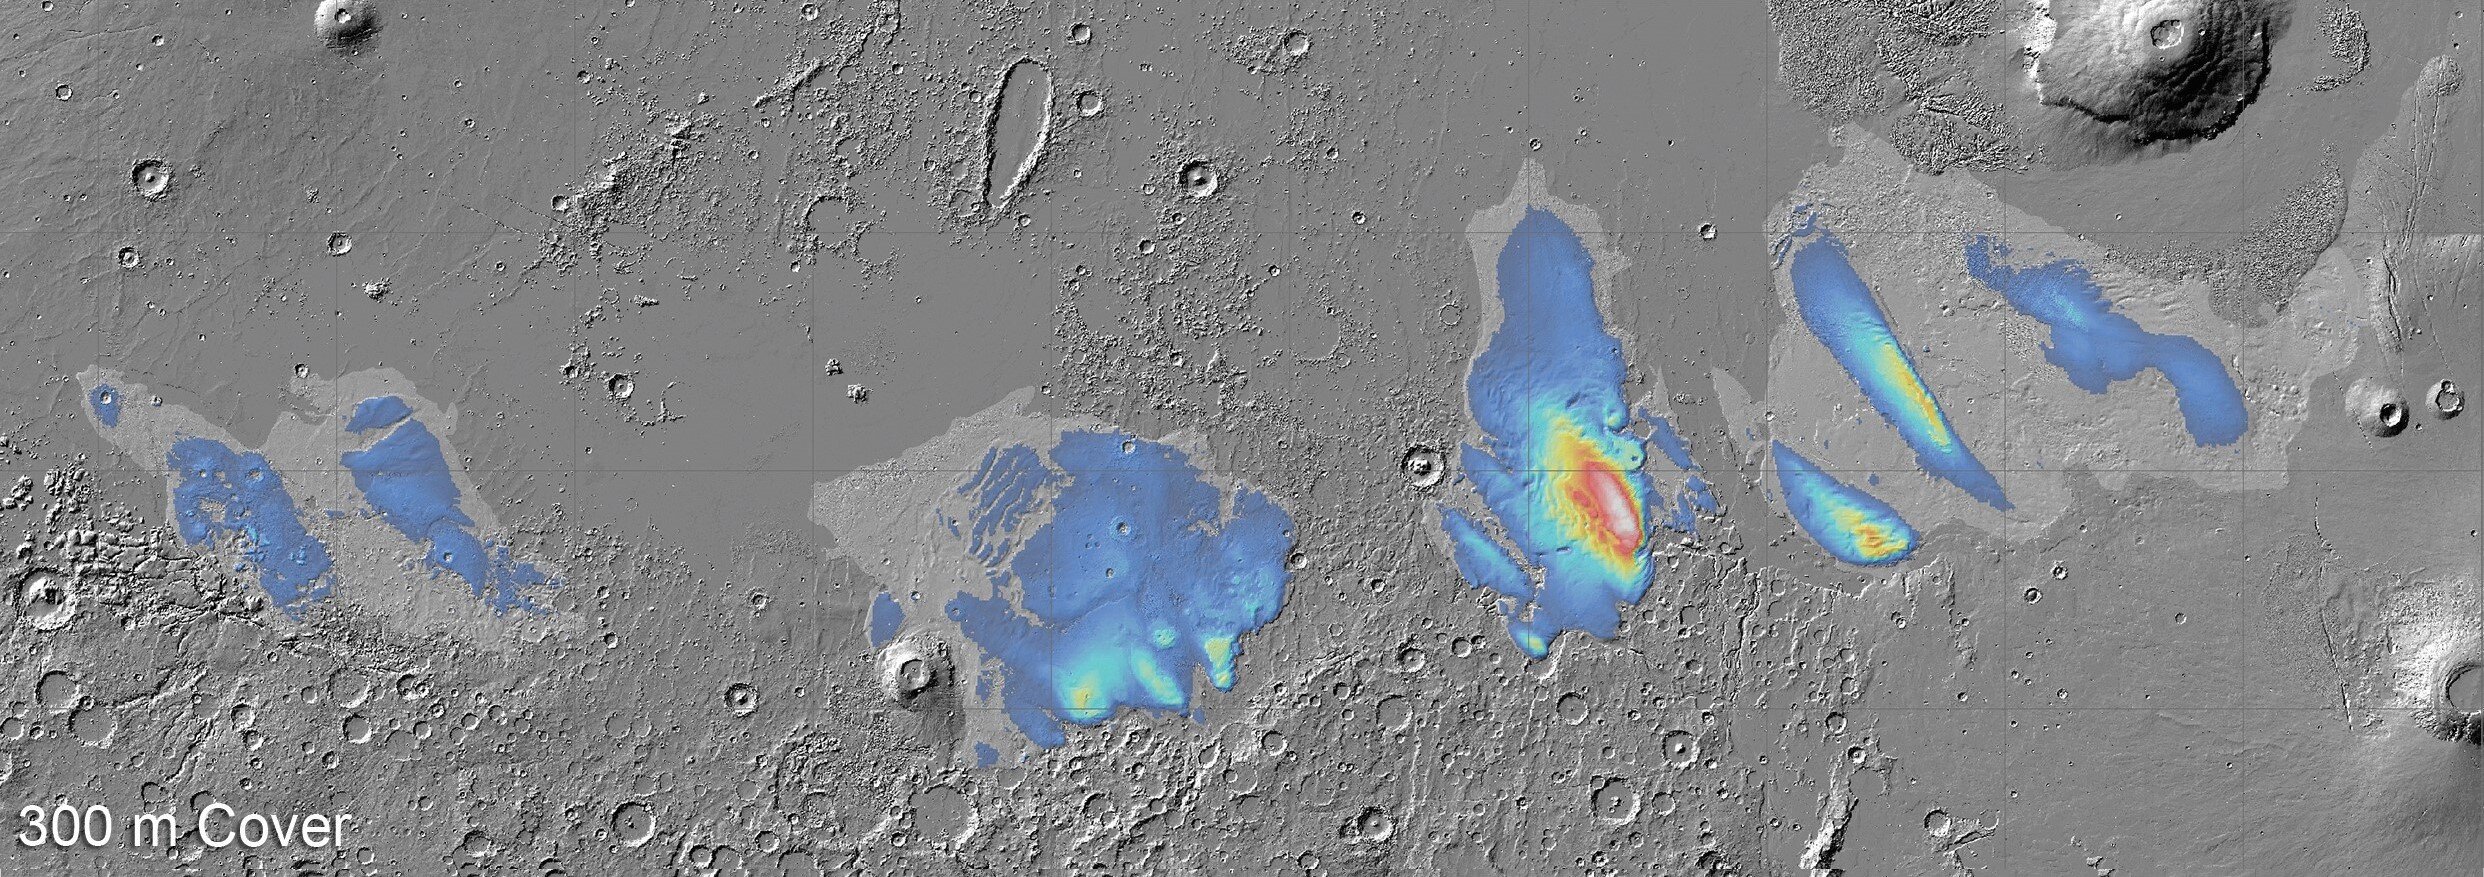 Large deposits of water ice are found under the Medusae Fossae Formation on Mars